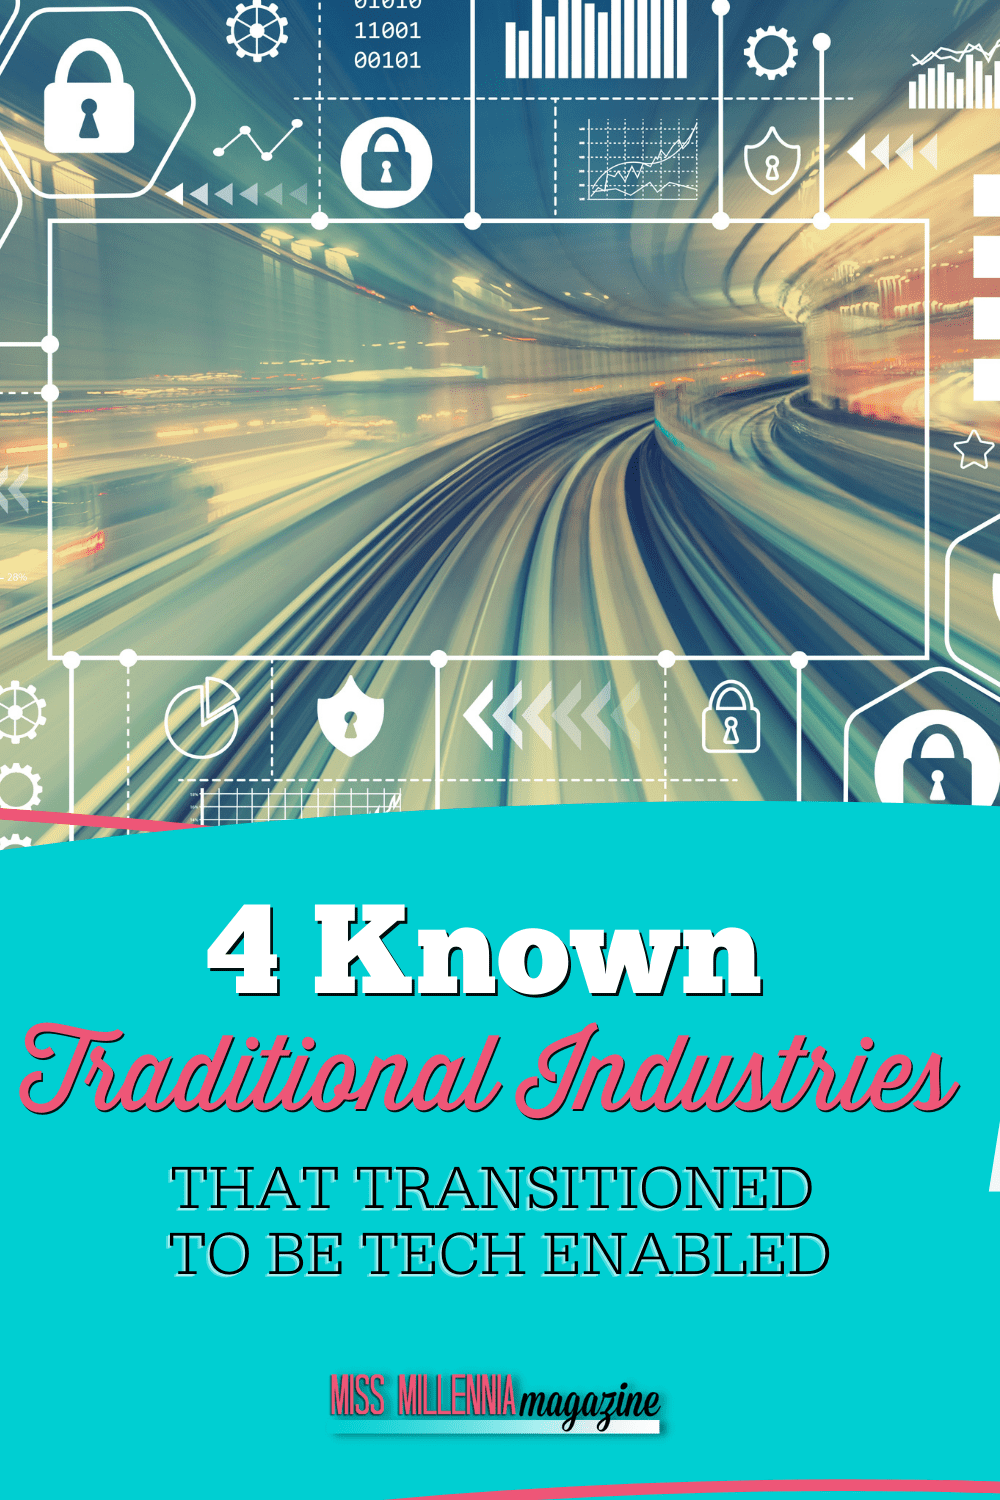 4 Known Traditional Industries that Transitioned to be Tech Enabled